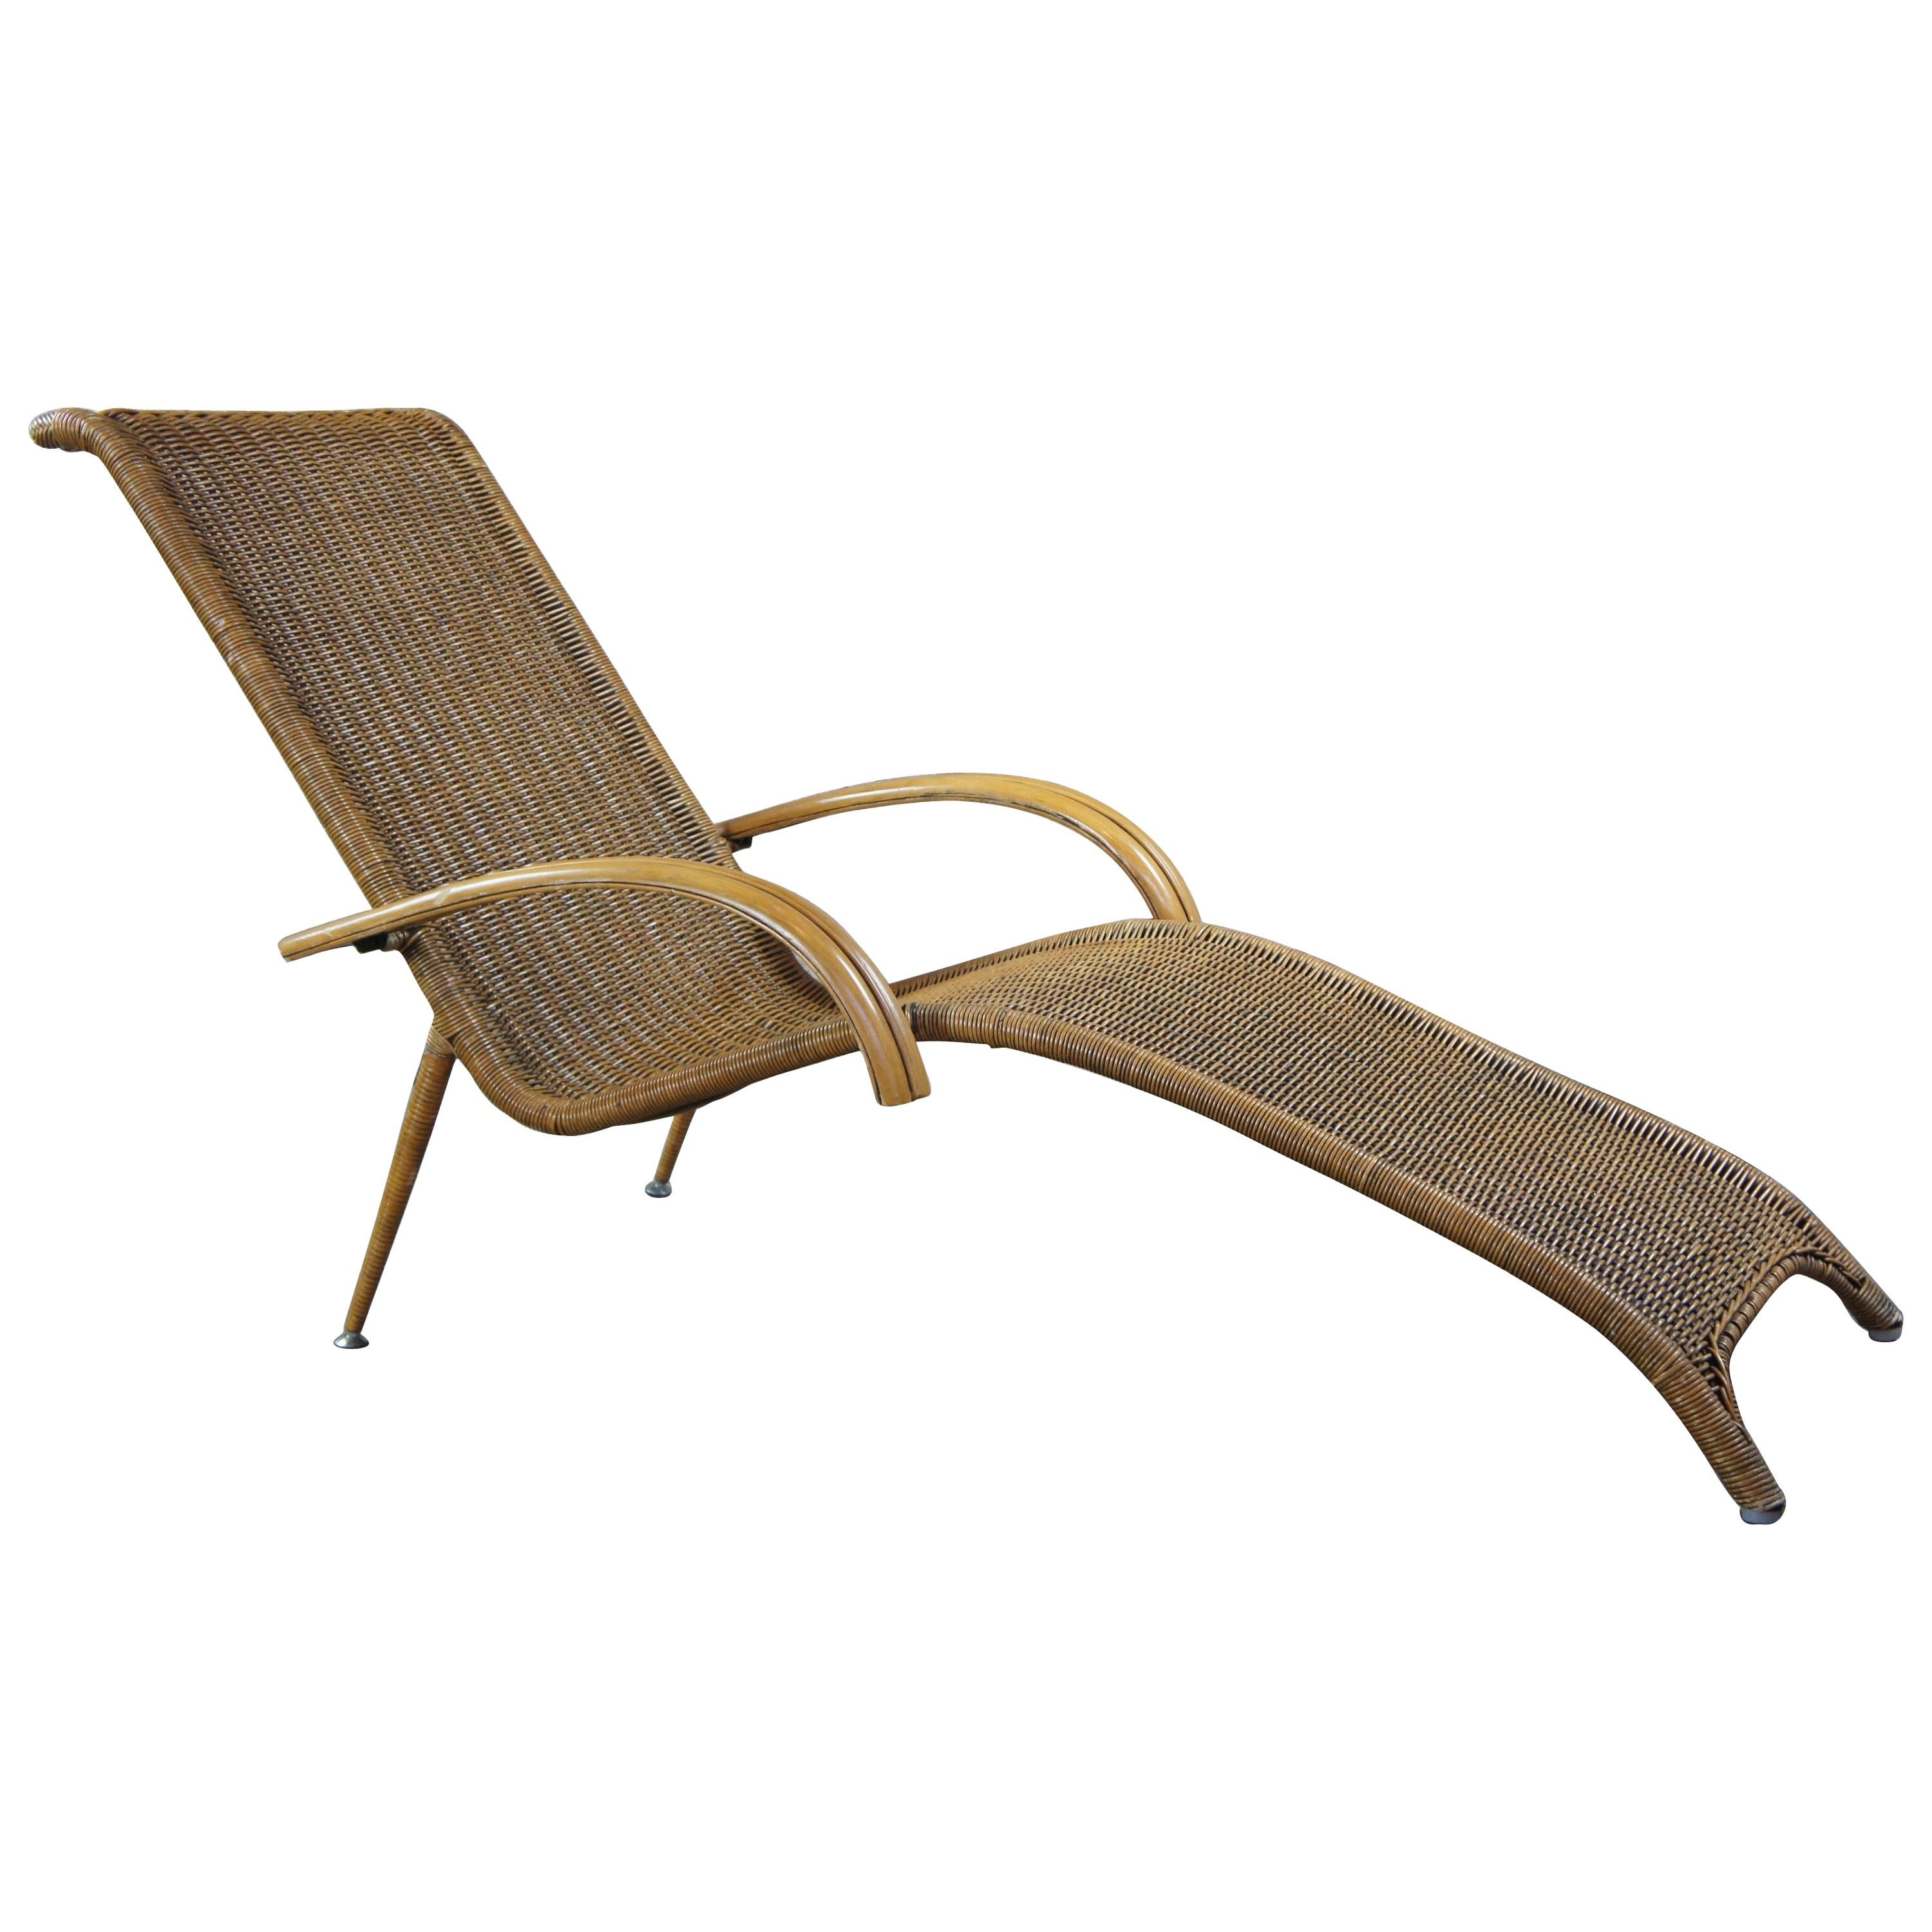 Midcentury Sculptural Italian Modern Cane and Bamboo Chaise Lounge Patio Chair